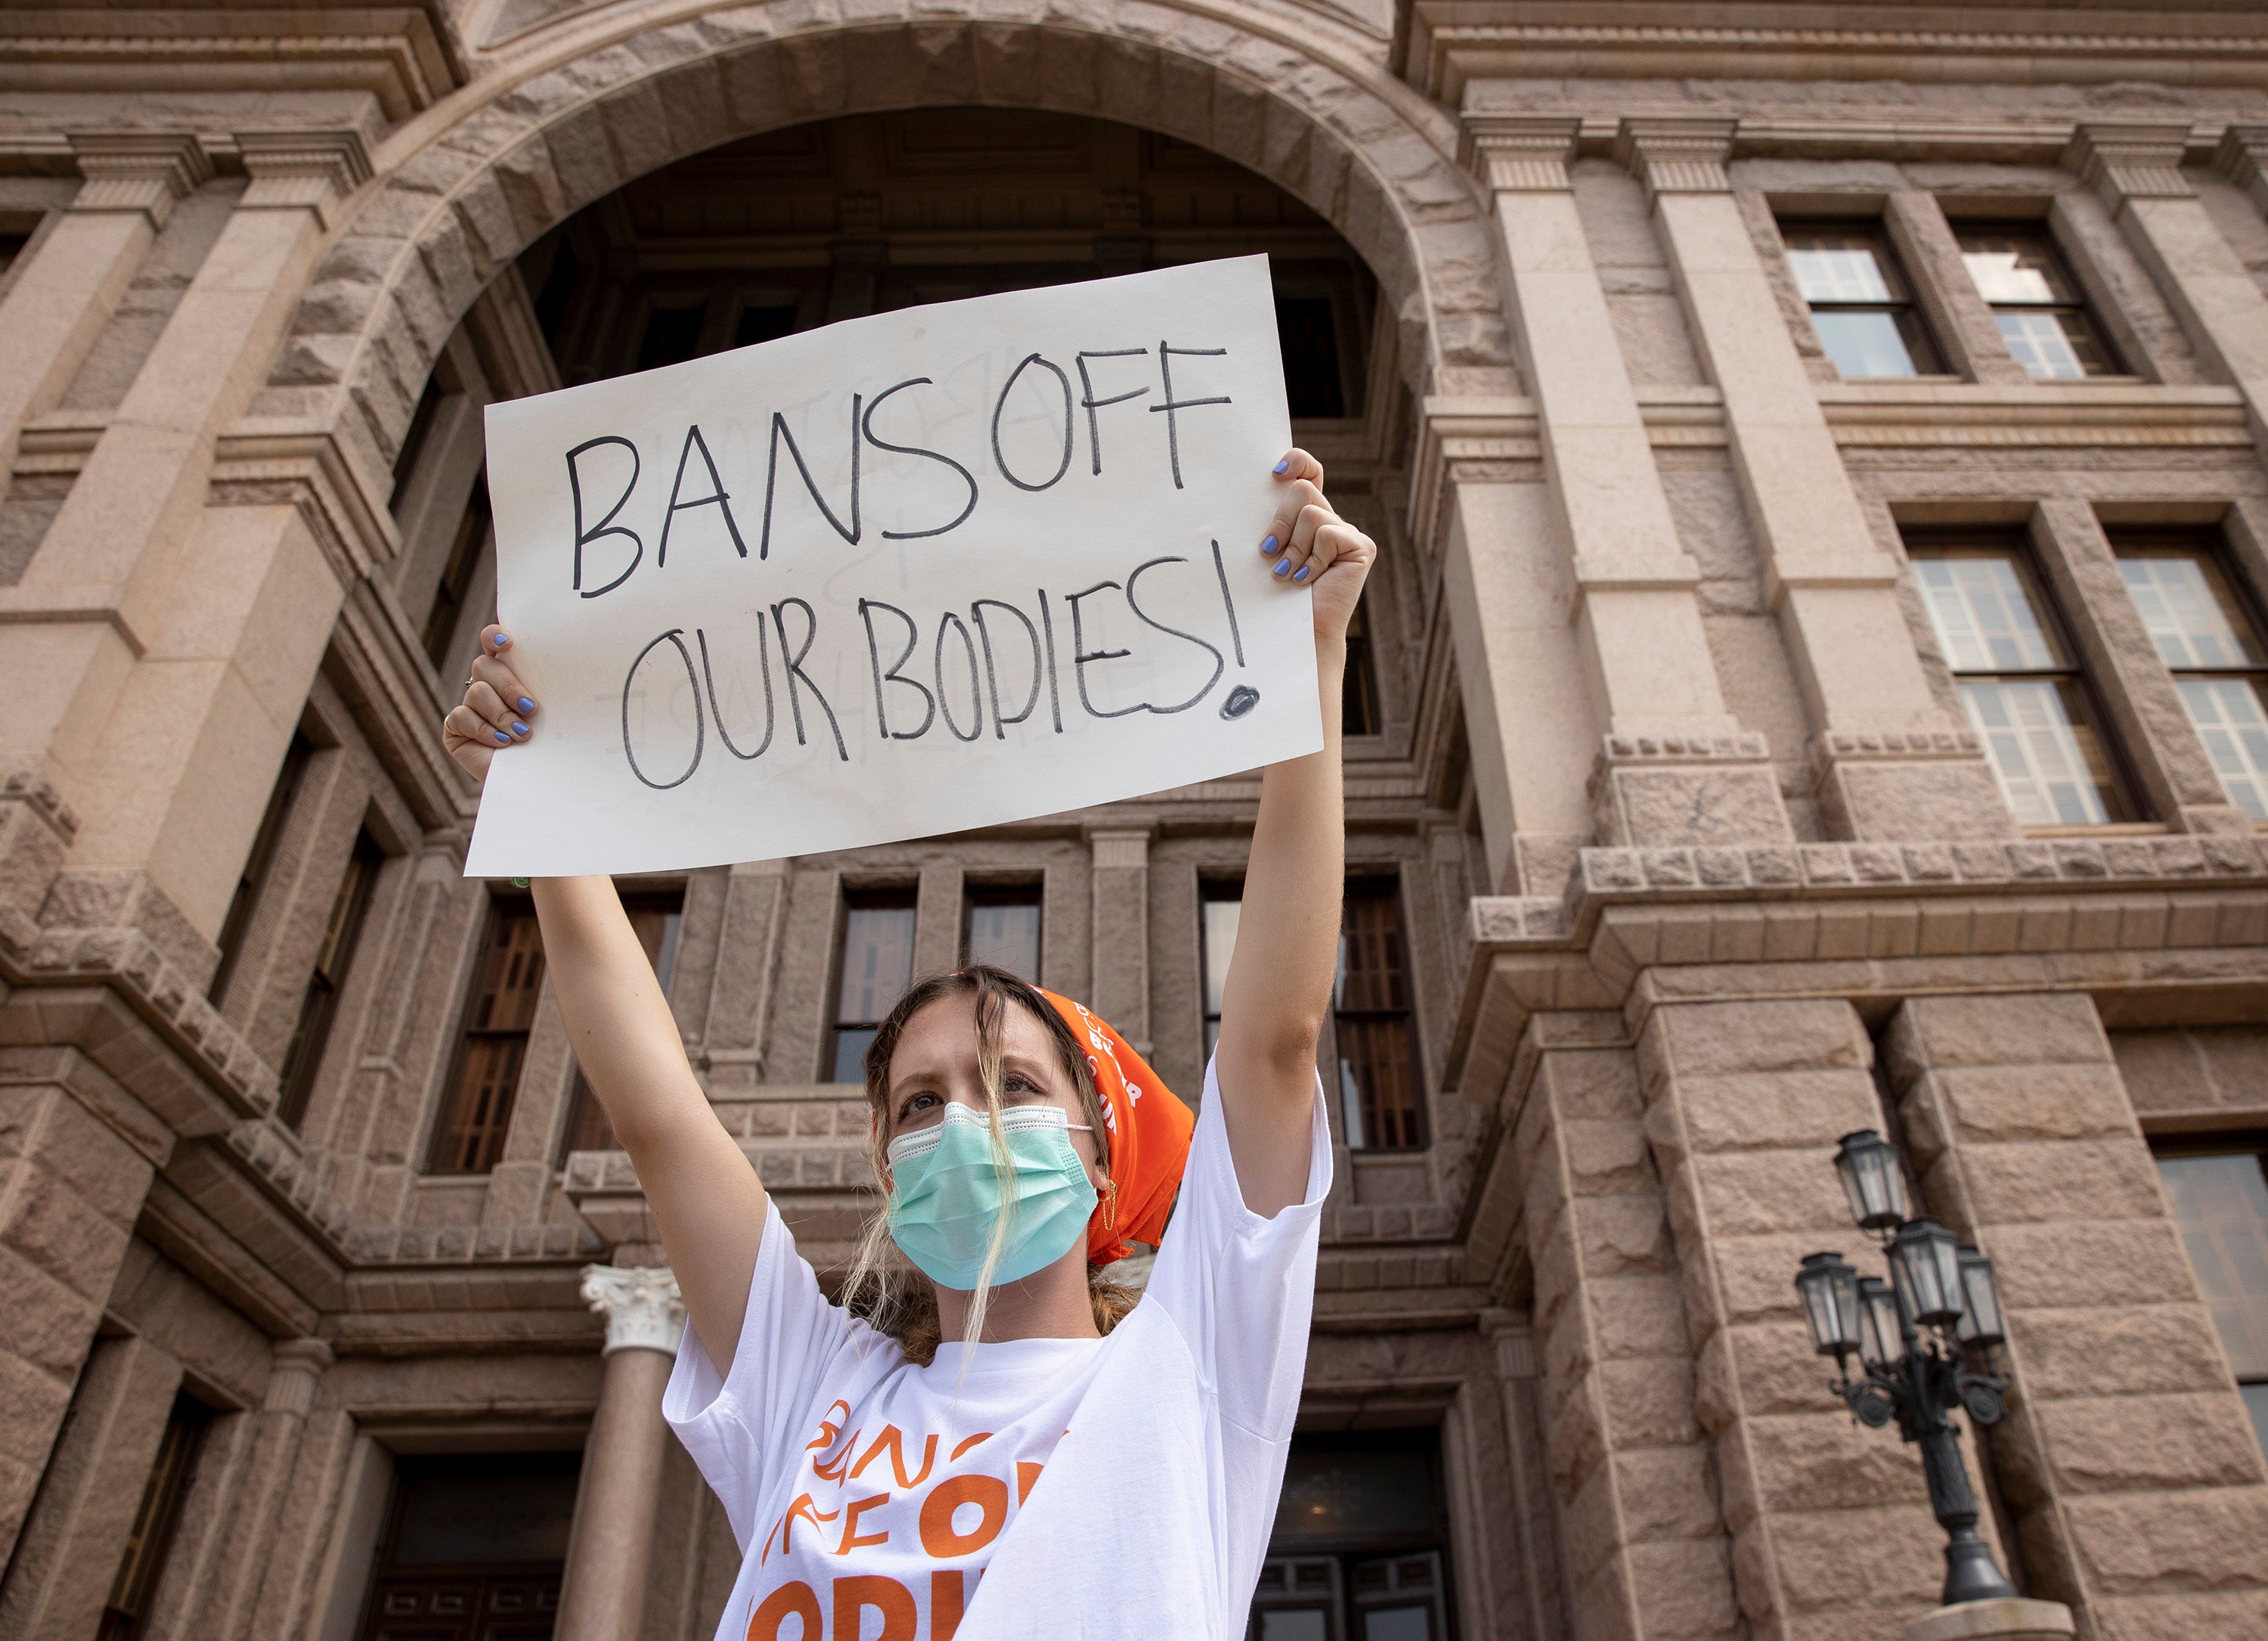 Texas law has sparked outrage among pro-choice Americans